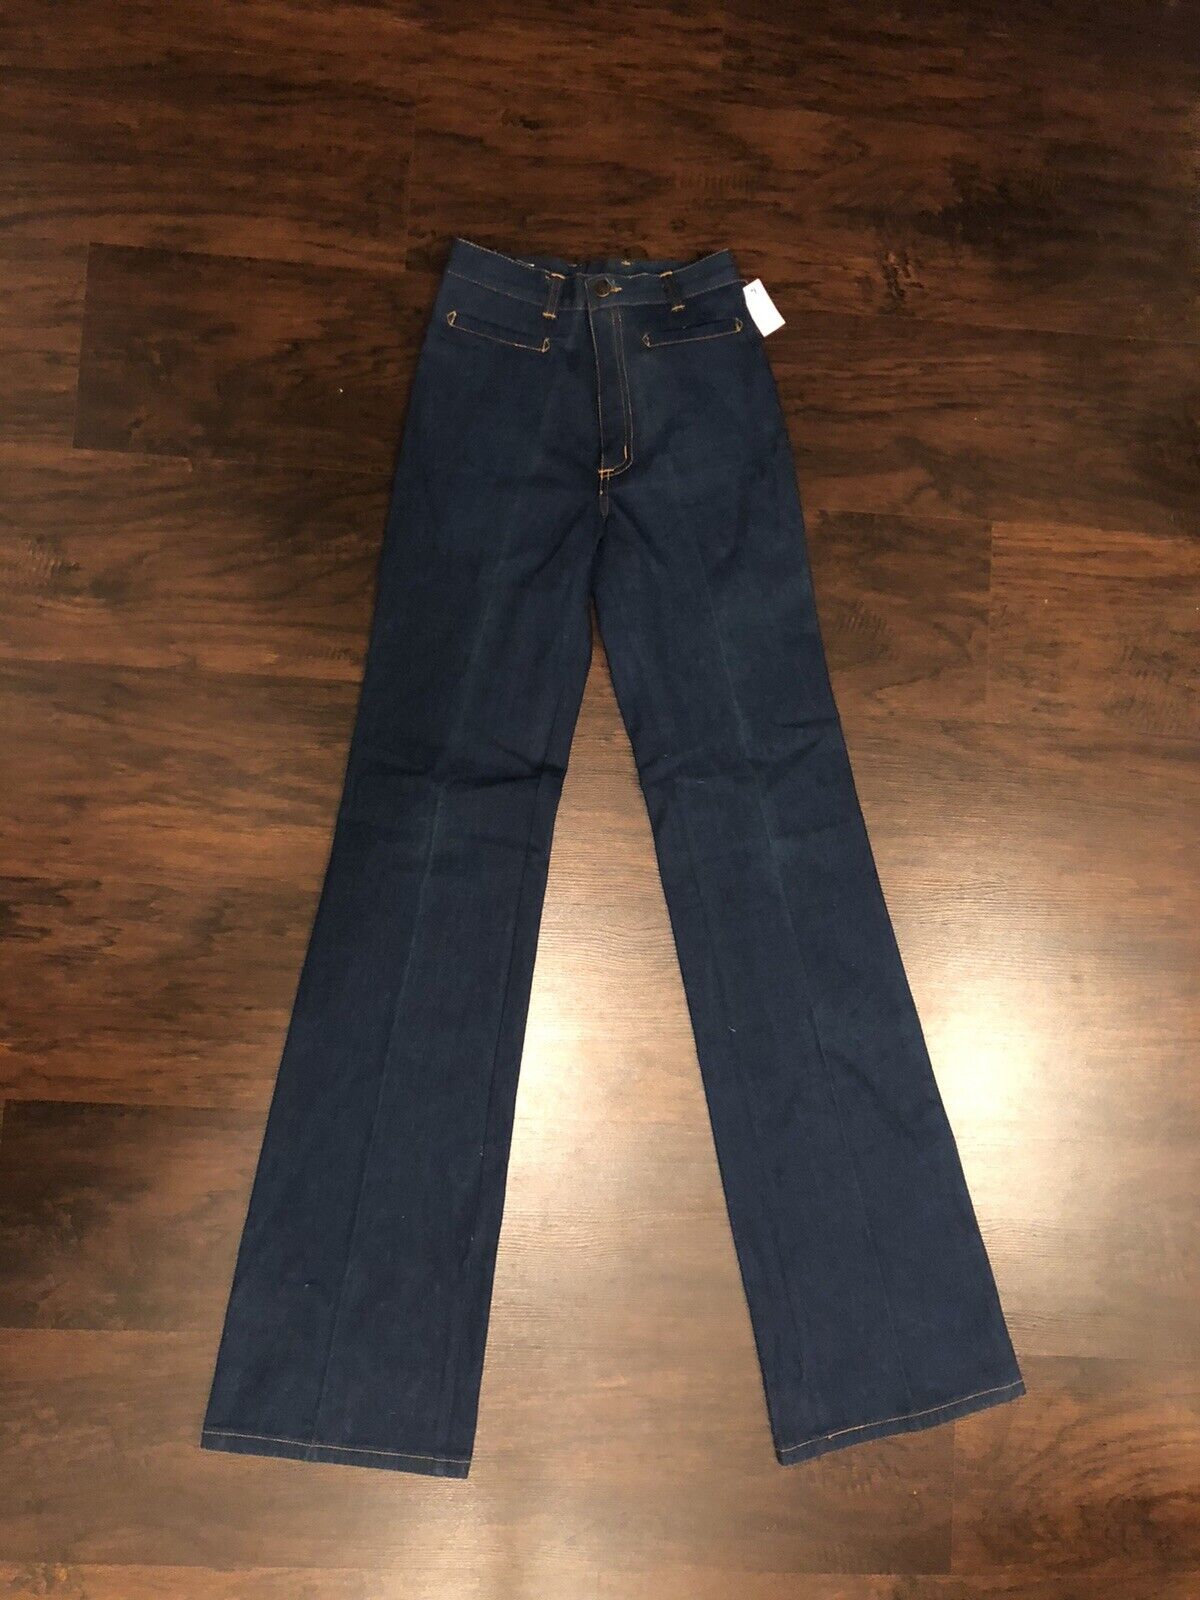 Deadstock 70s Vintage High Waisted Jeans - image 5